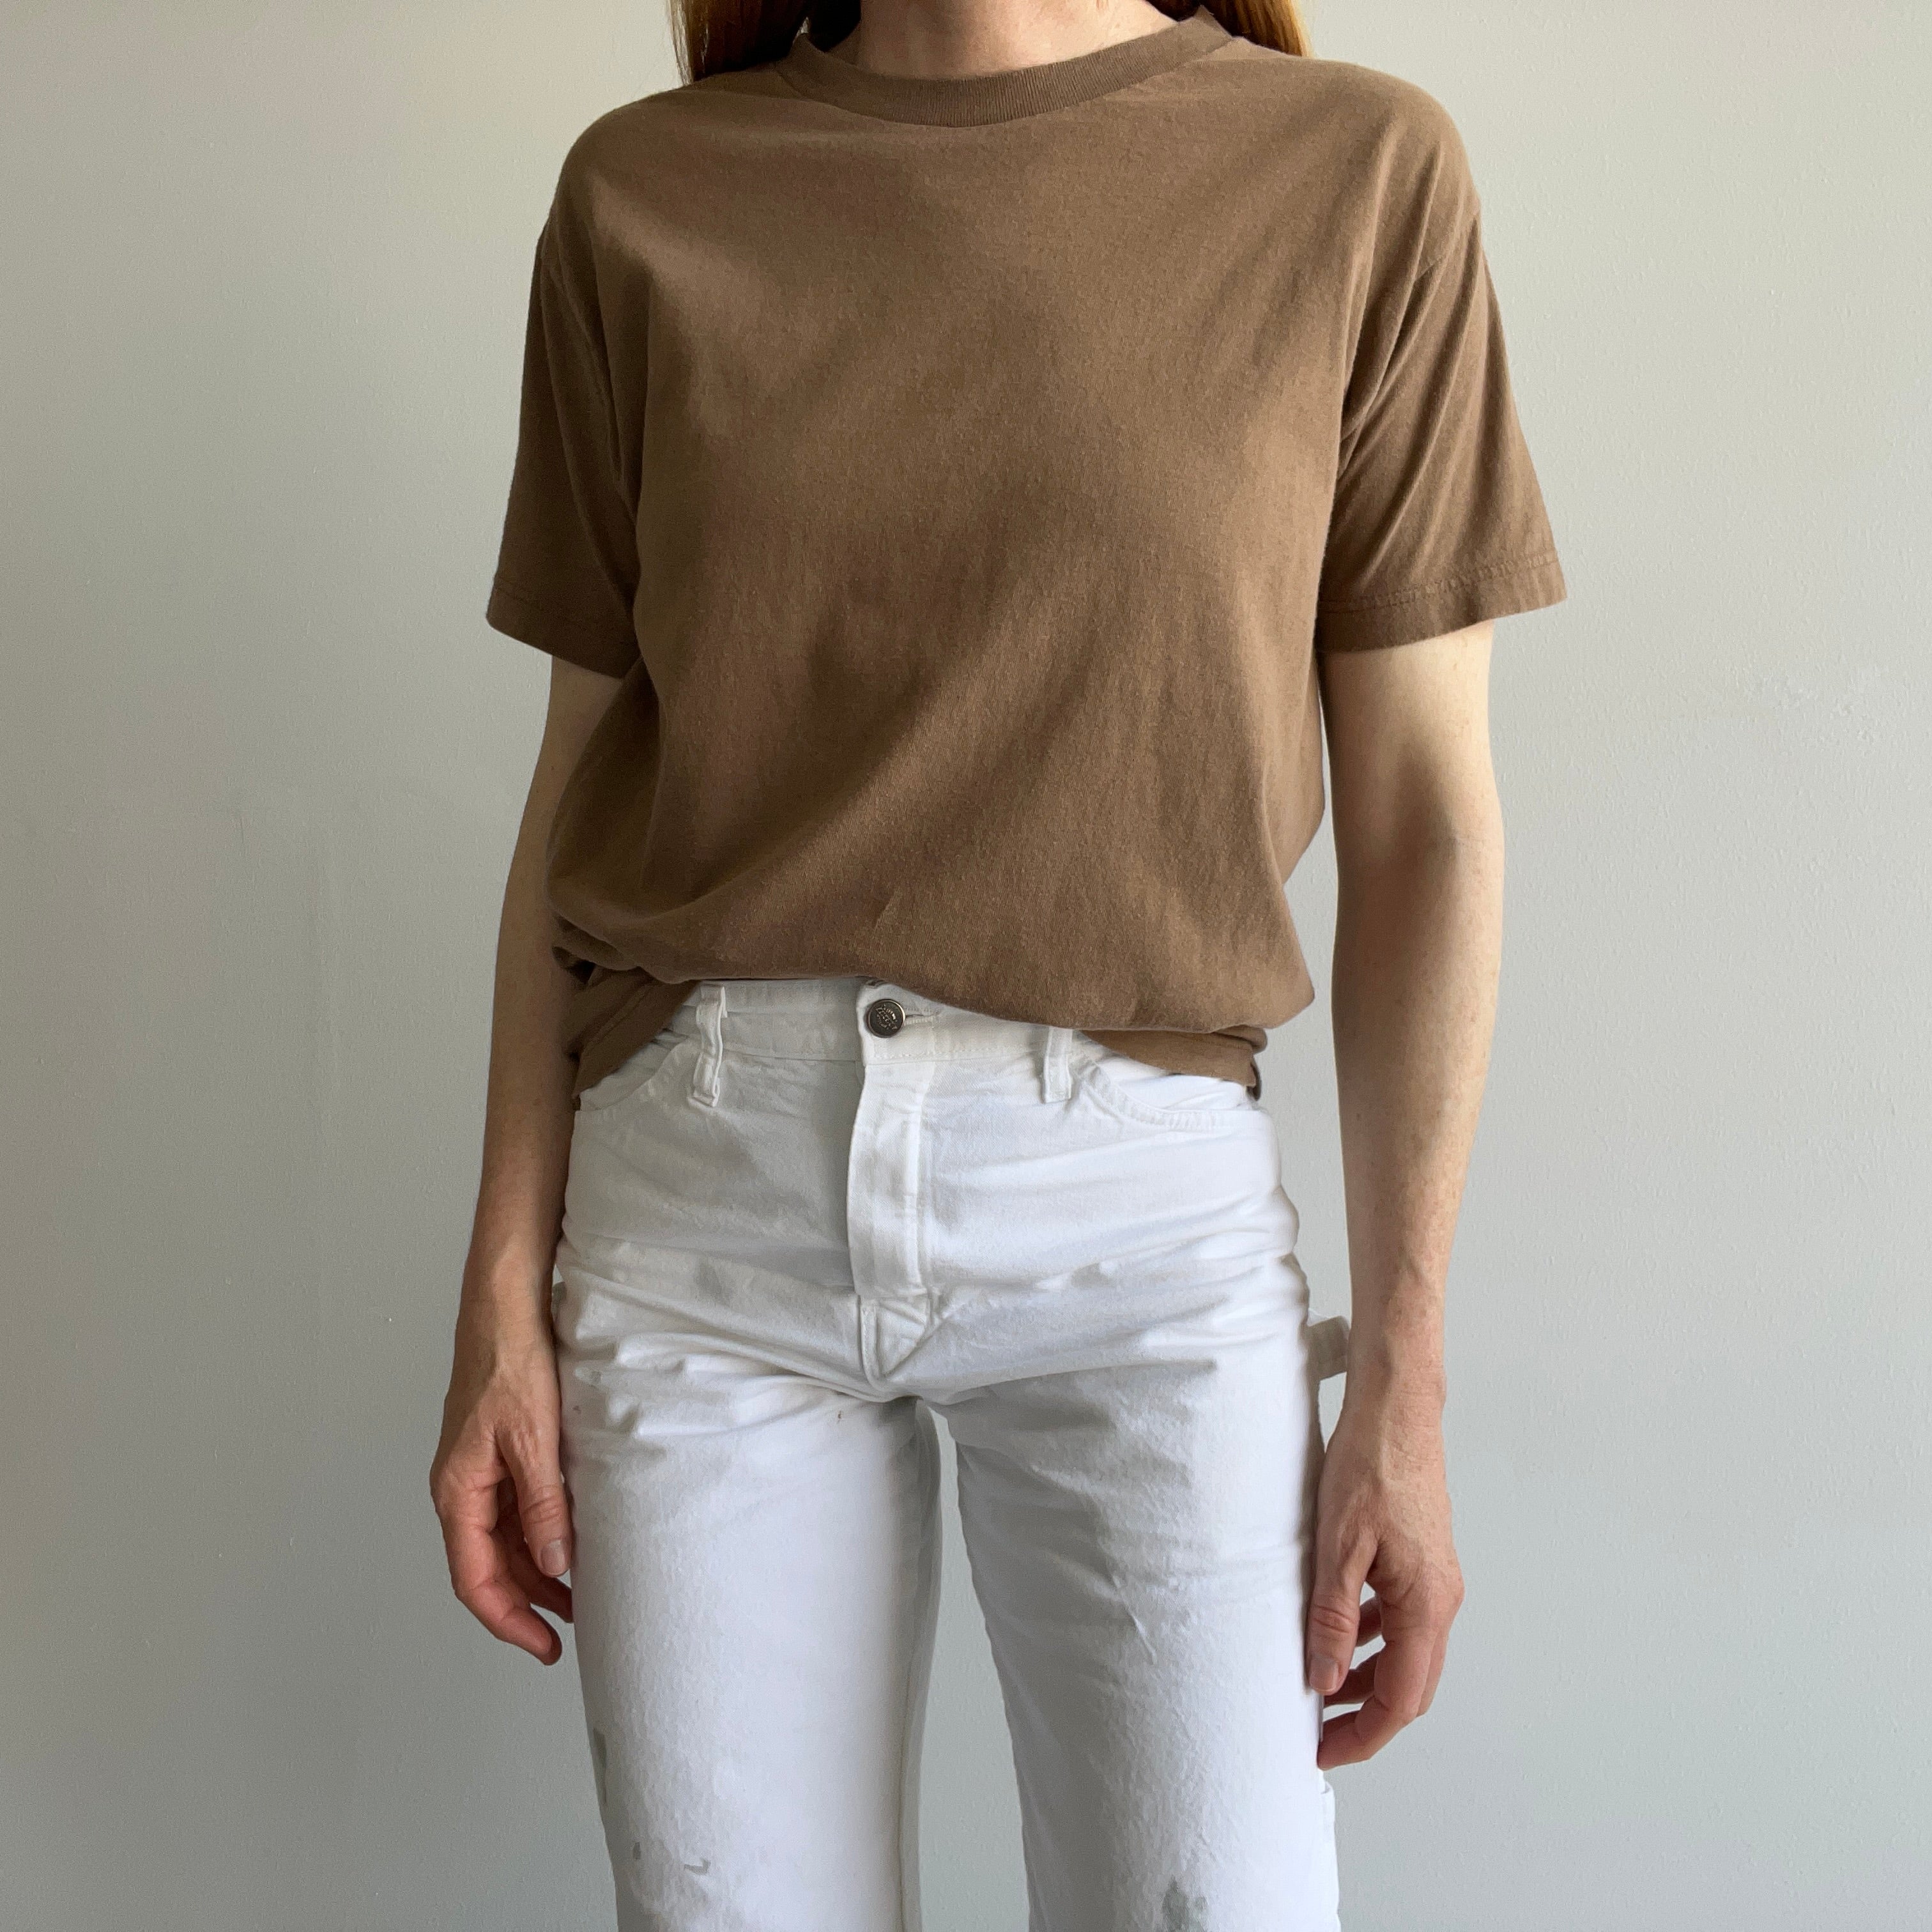 1980s Earth Brown Blank Cotton T-Shirt